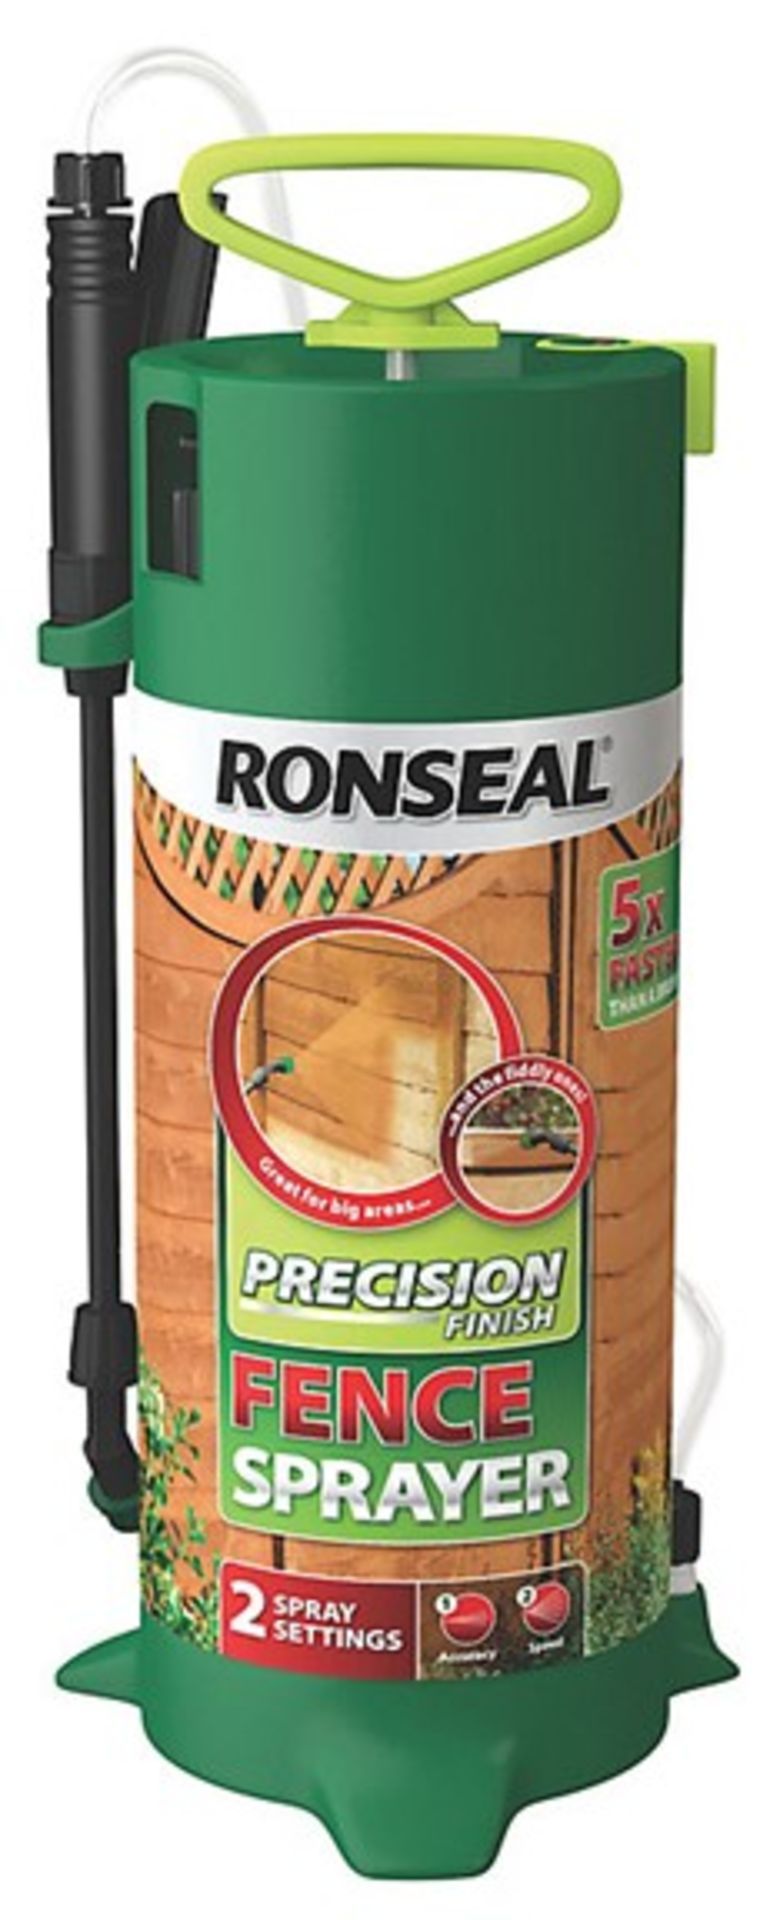 (REF2078828) 1 Pallet of Customer Returns - Retail value at new £709.36. To include: RONSEAL WOOD - Image 2 of 3